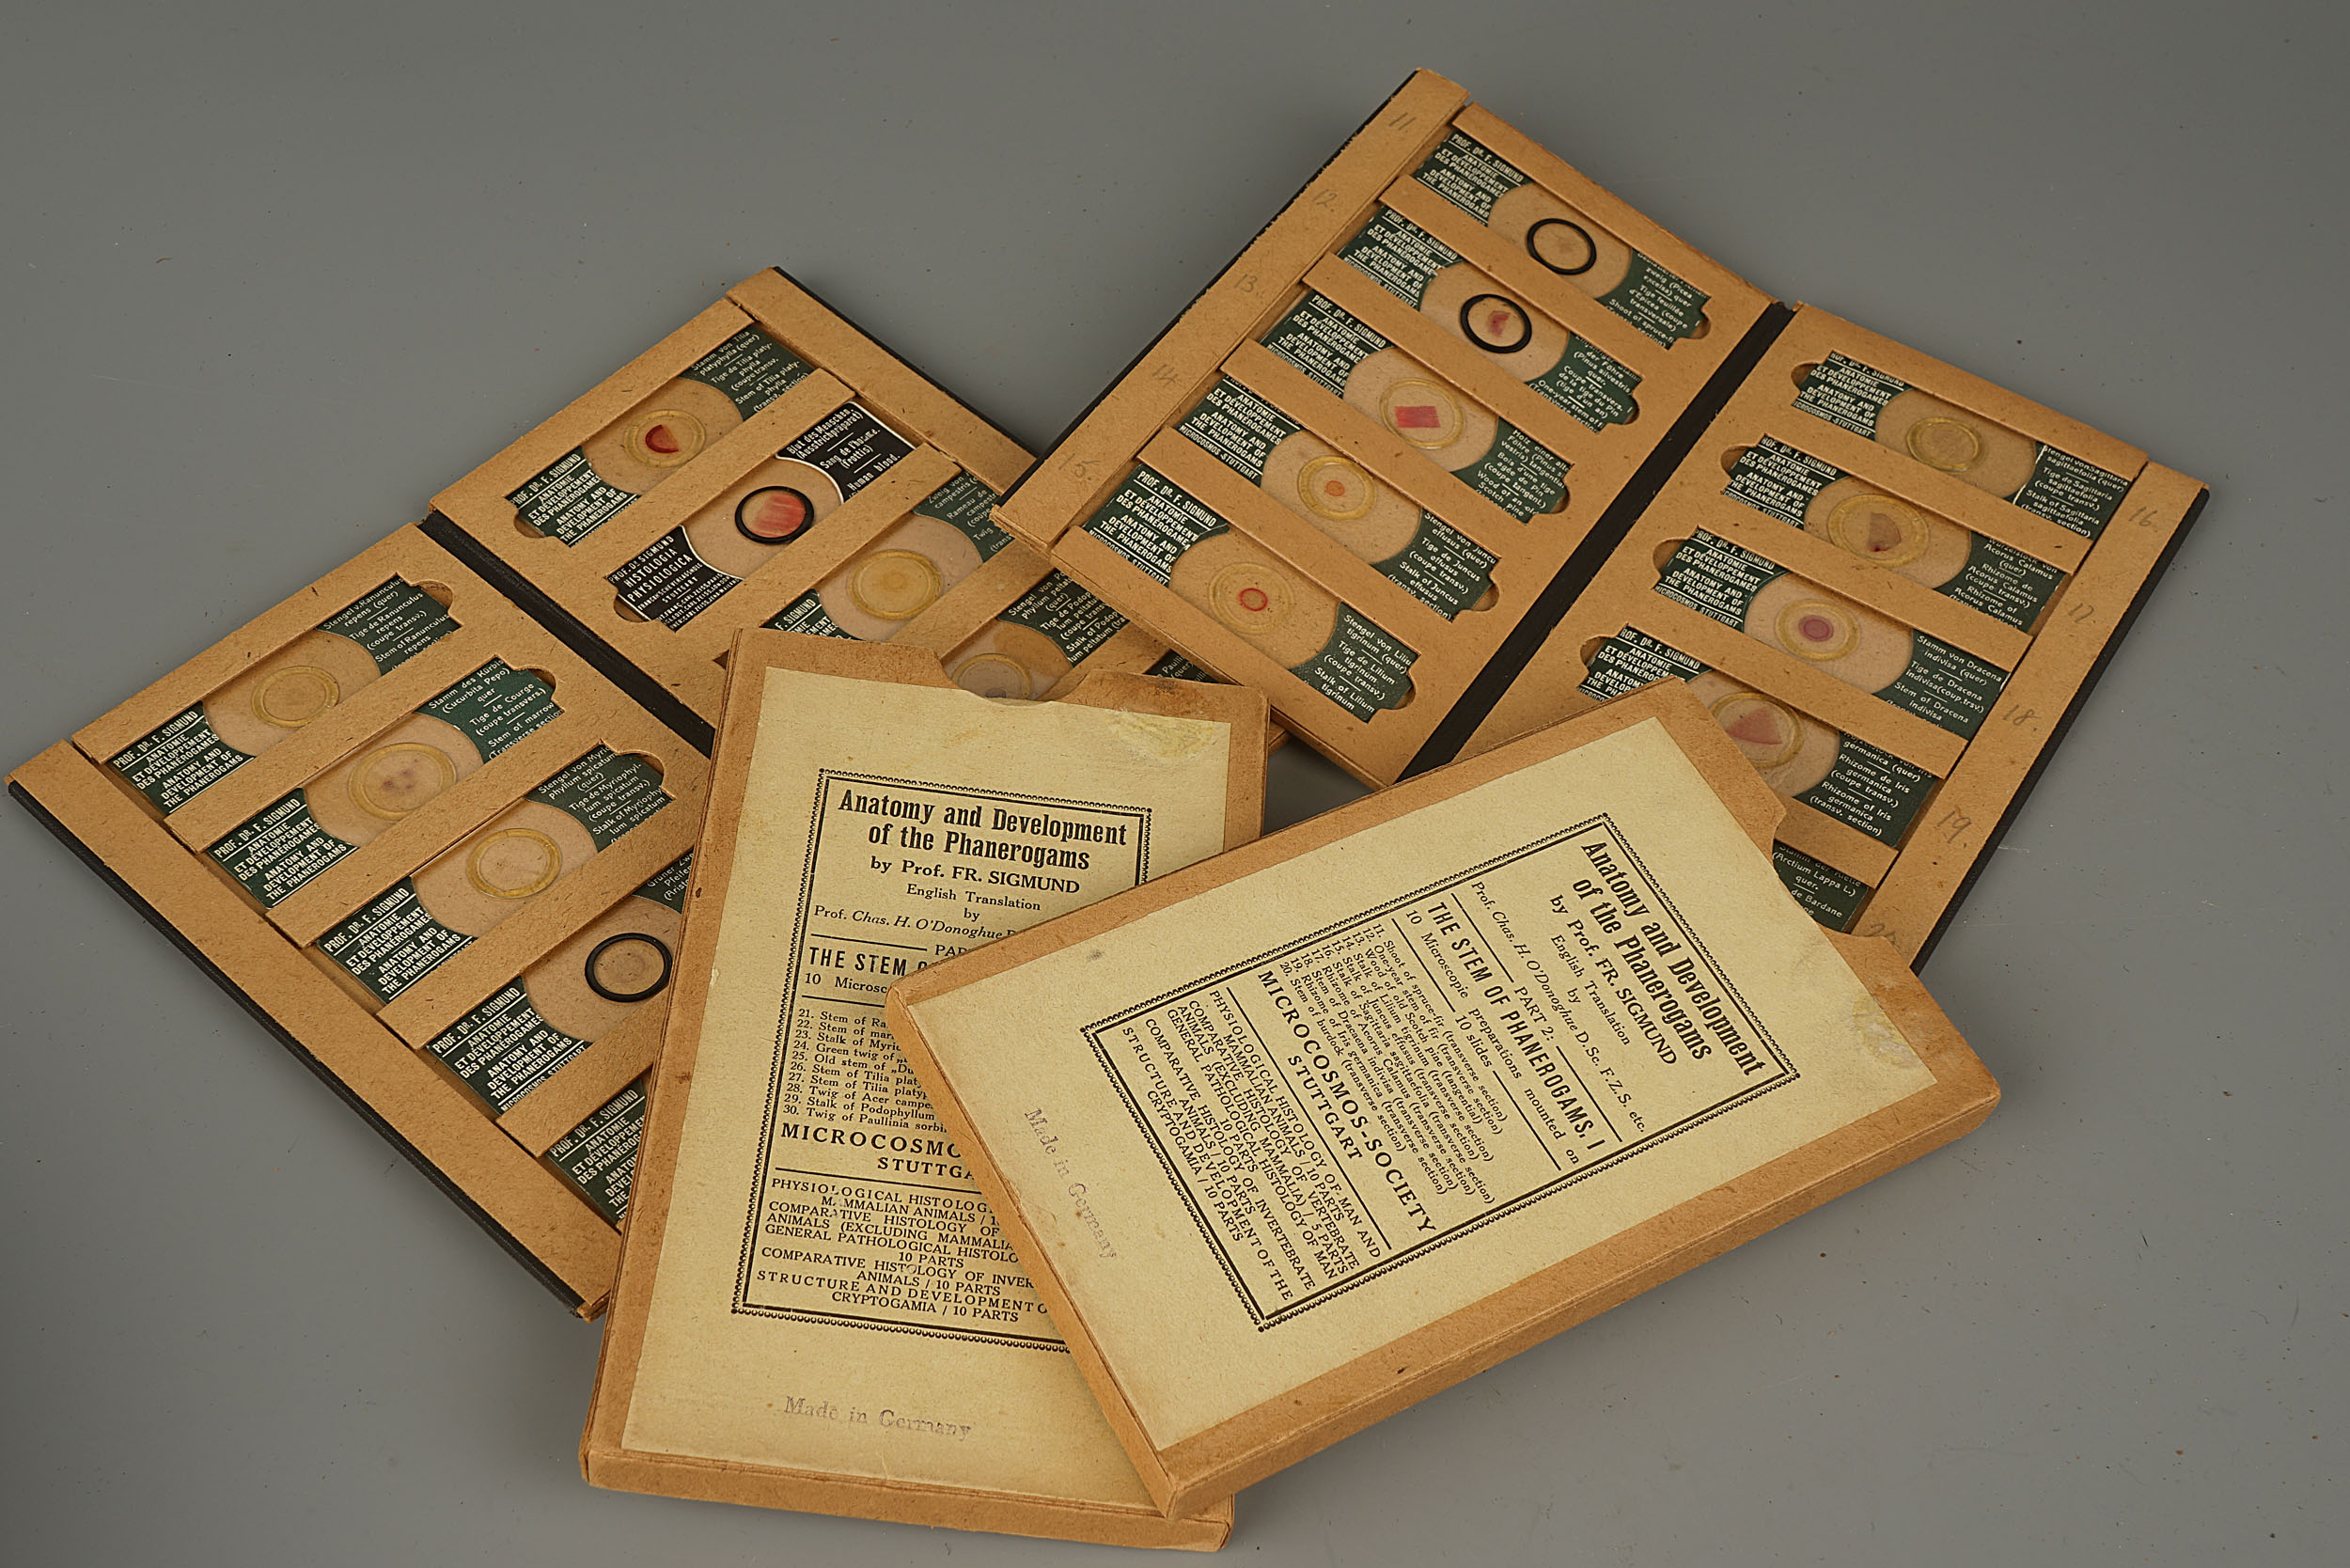 Two Sets of Microscope Slides by Prof. Fr. Sigmund,